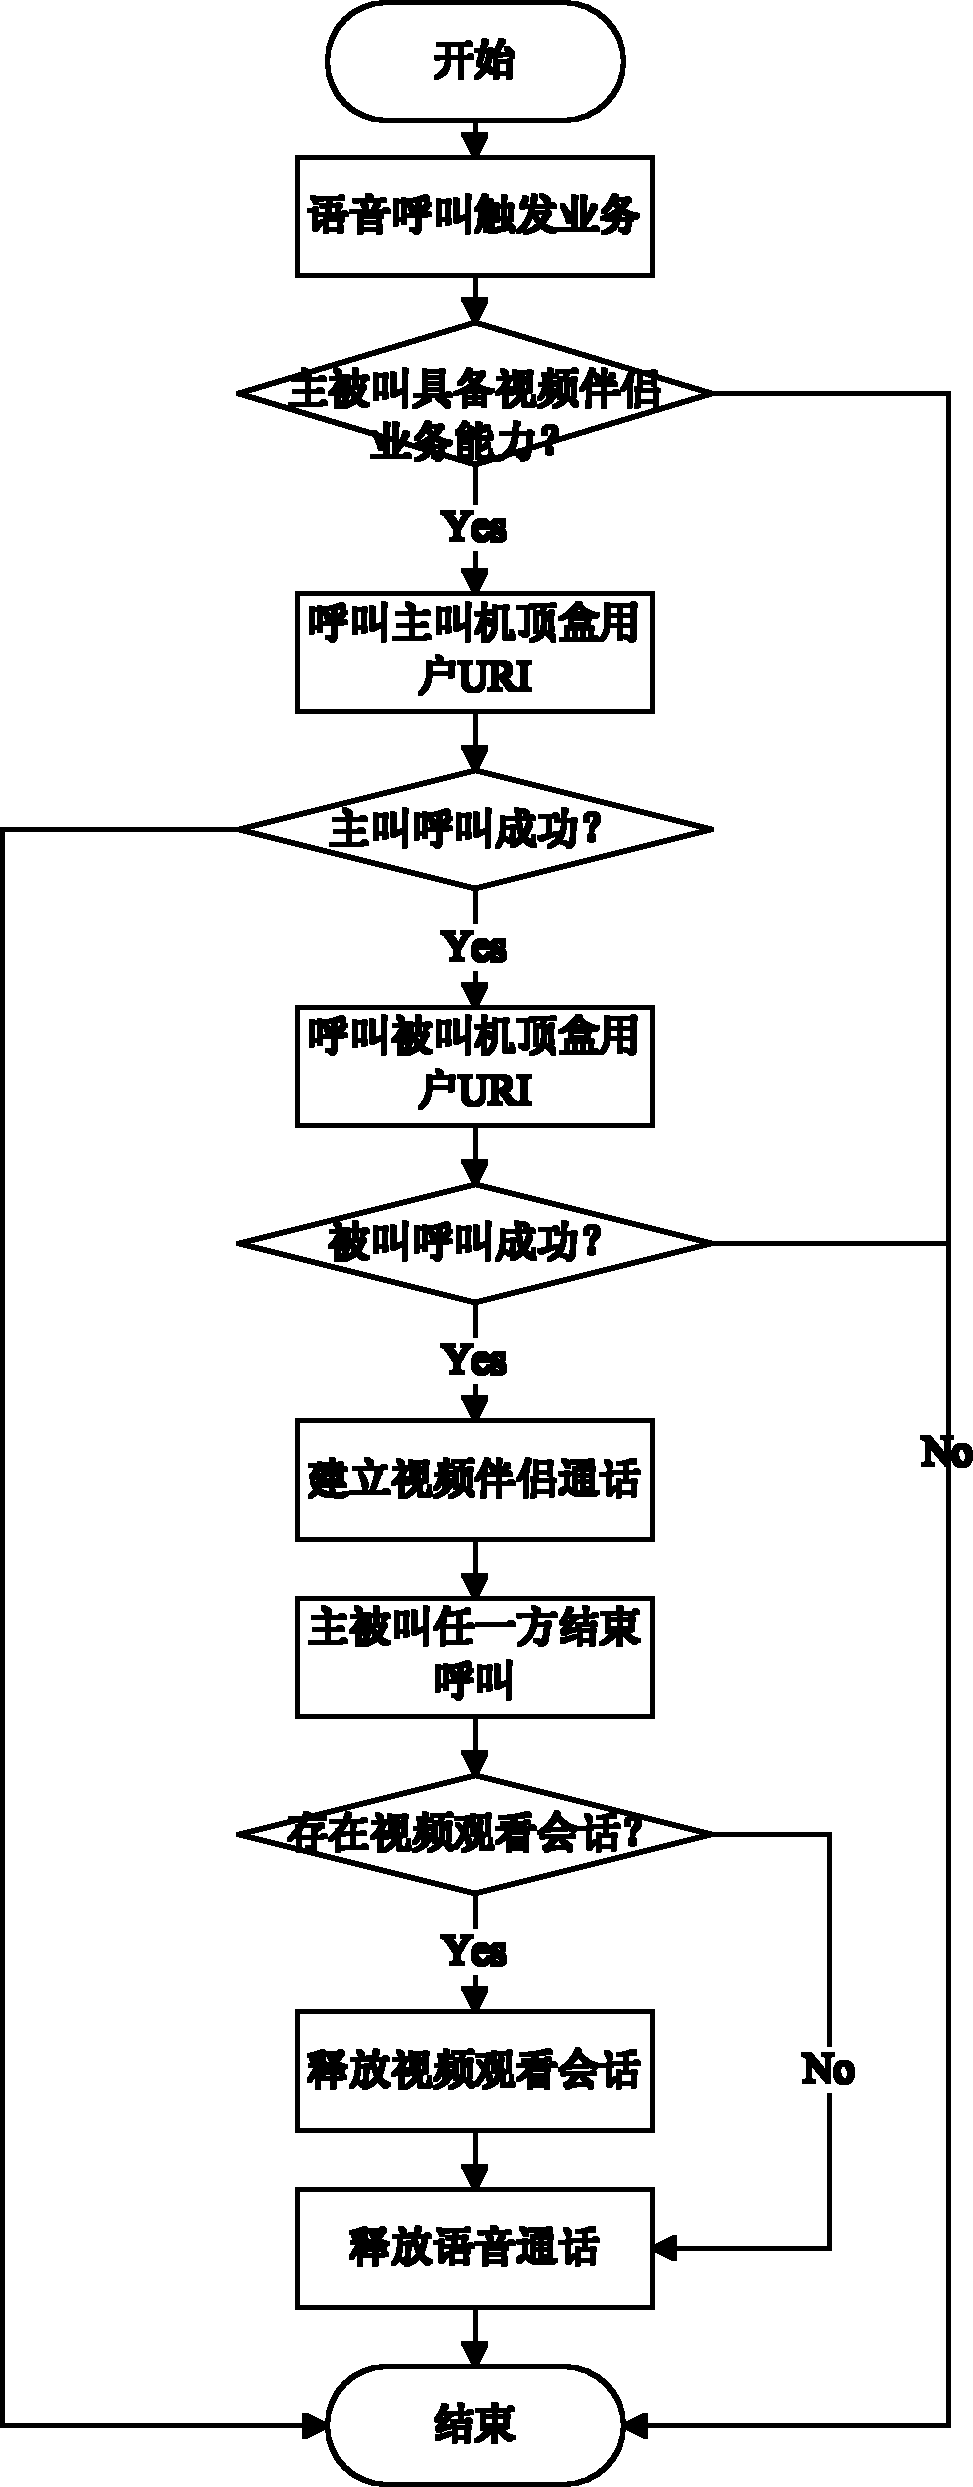 Method and system for voice and video calls